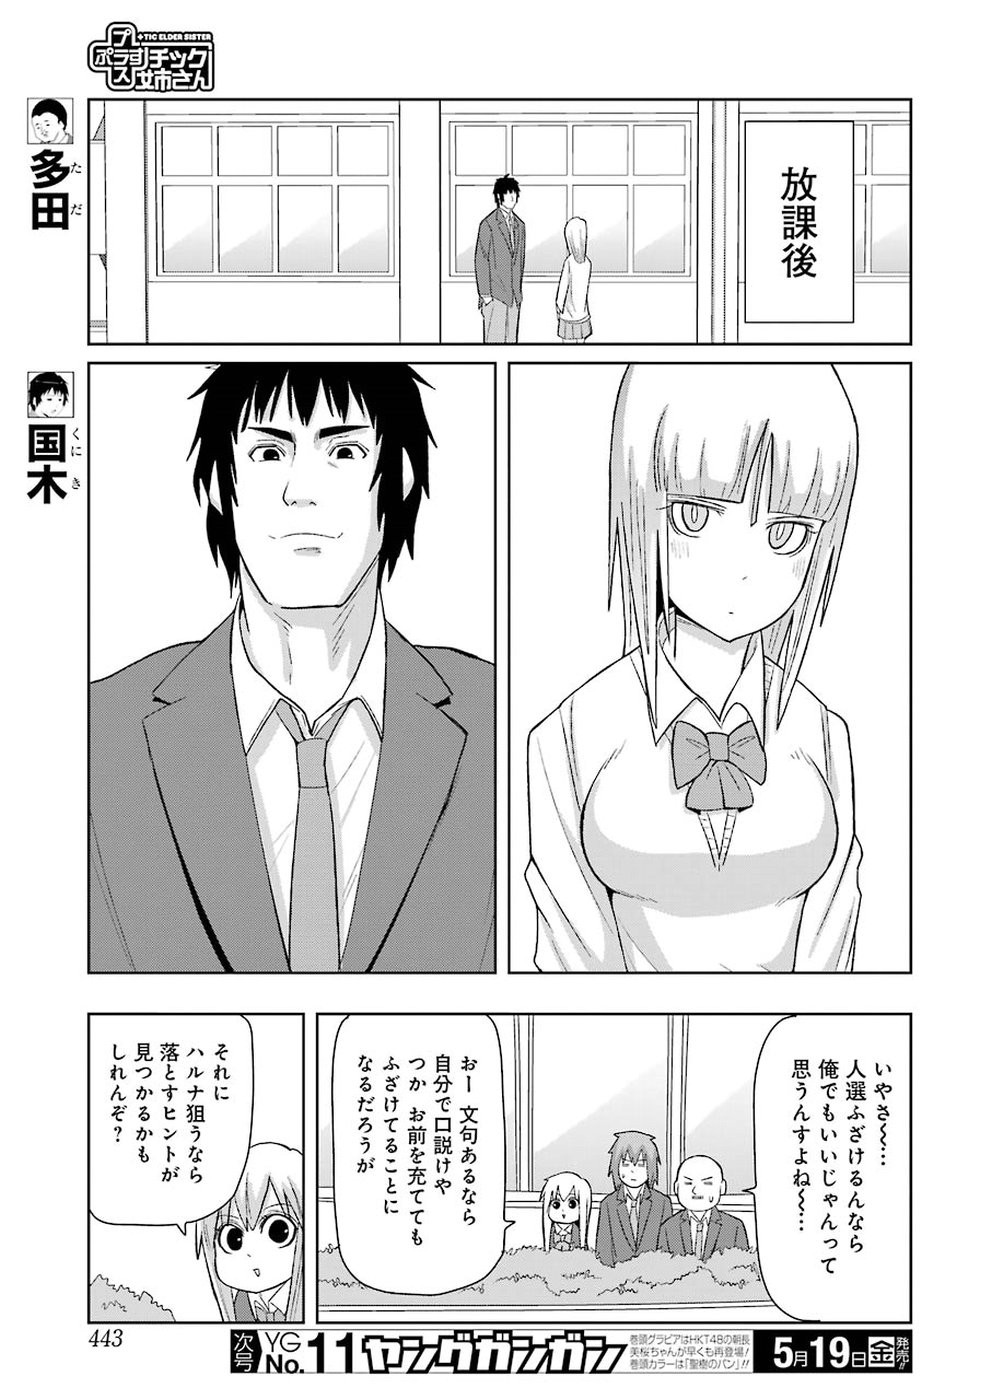 + Tic Nee-san - Chapter 146 - Page 3